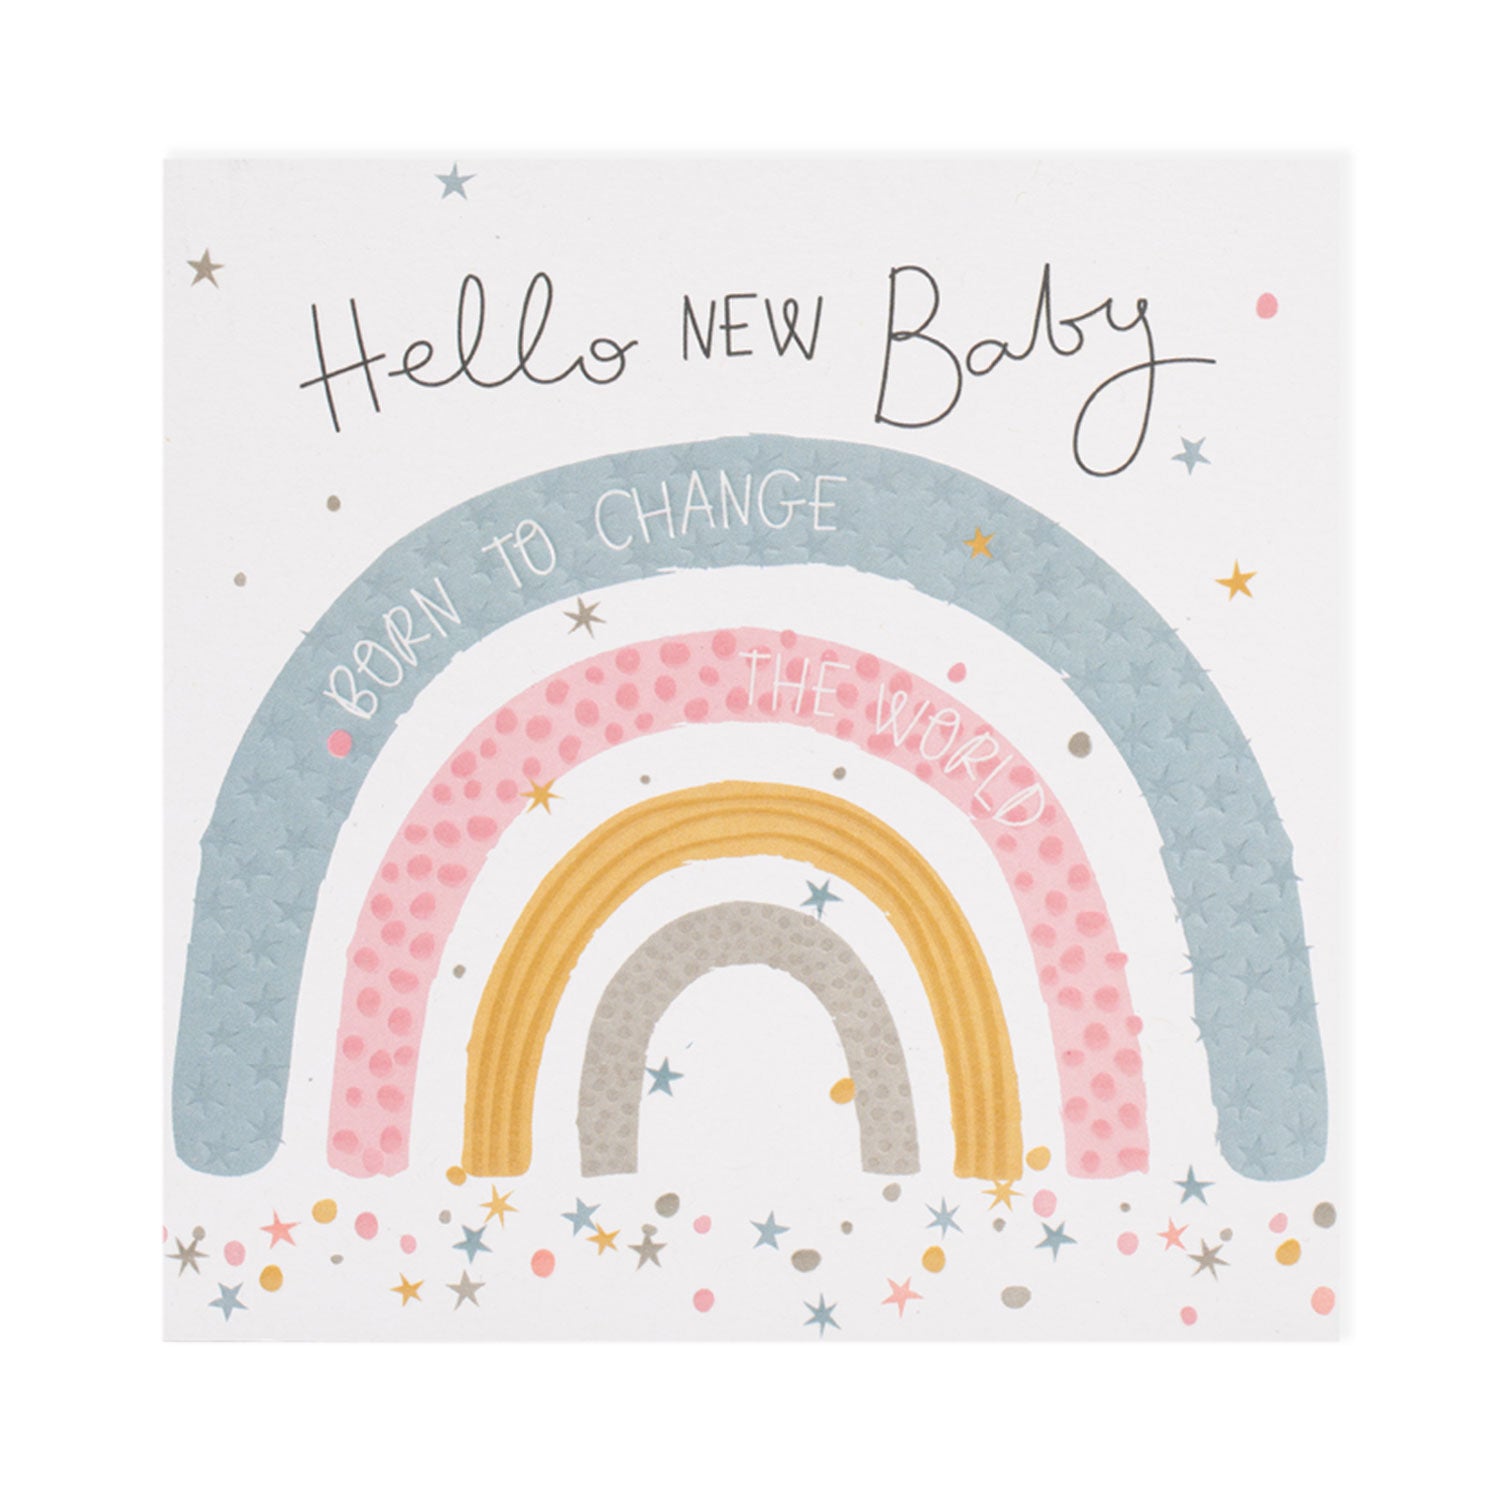 Baby Born to change the world - Belly Button Designs